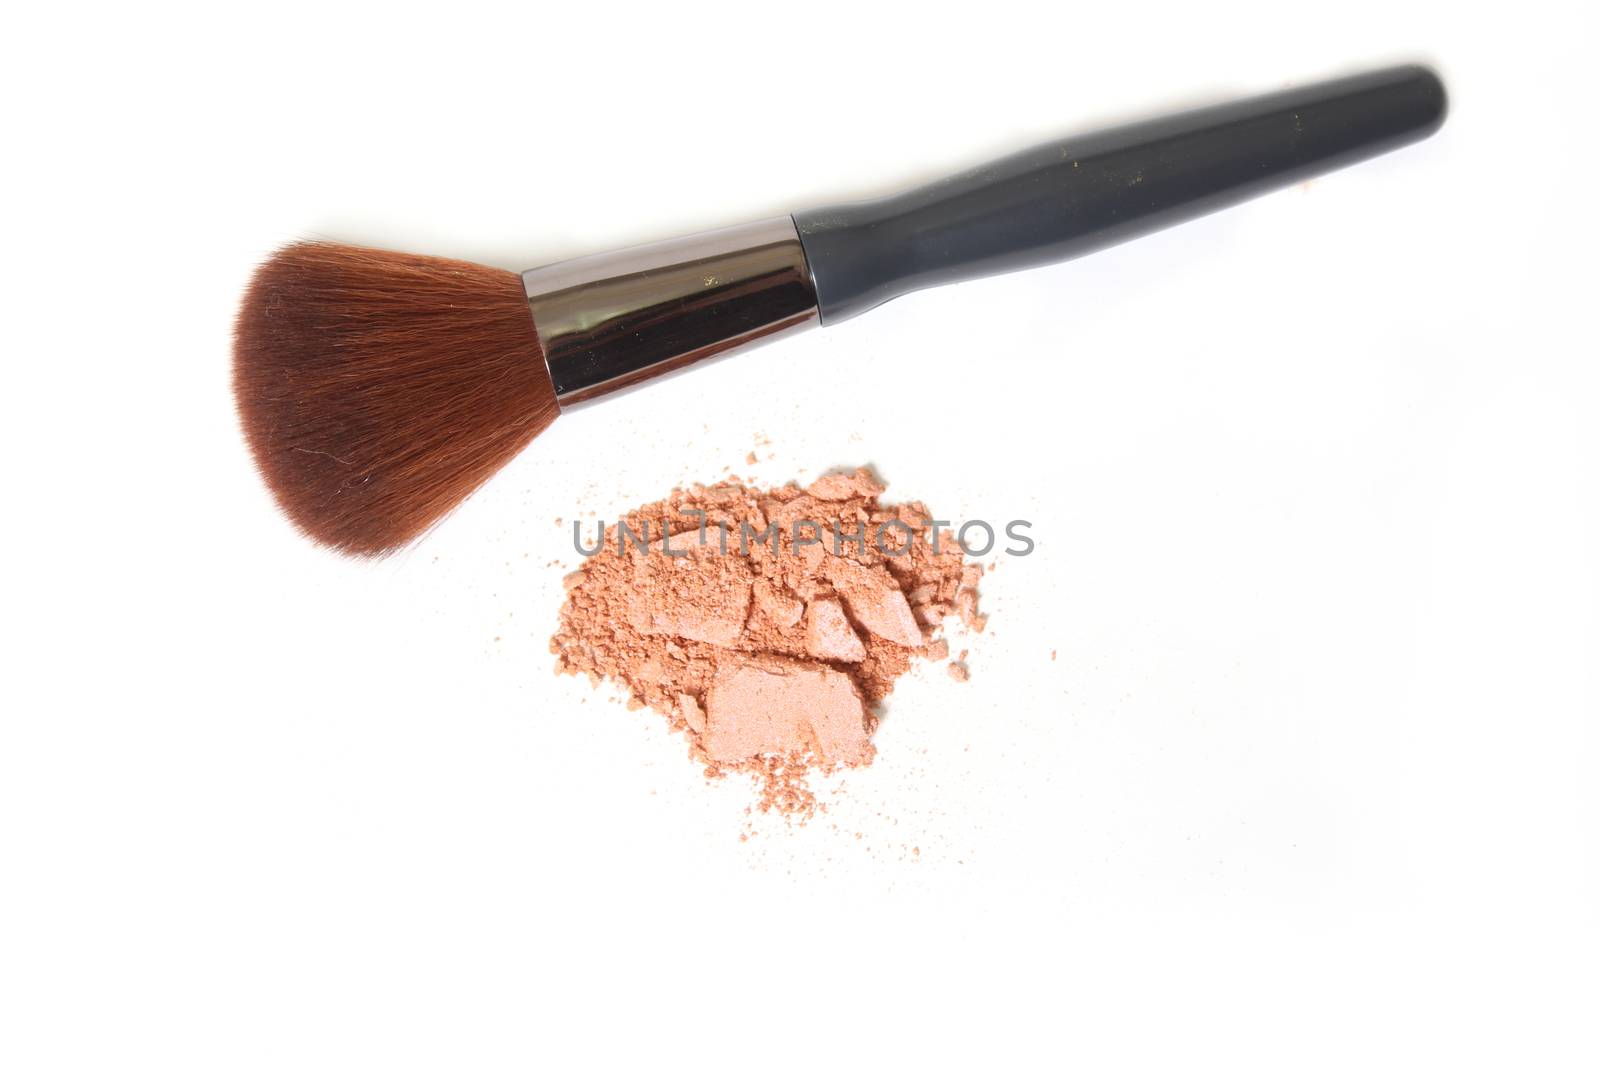 Pink Broken Eyeshadow With Brush on White by Marti157900